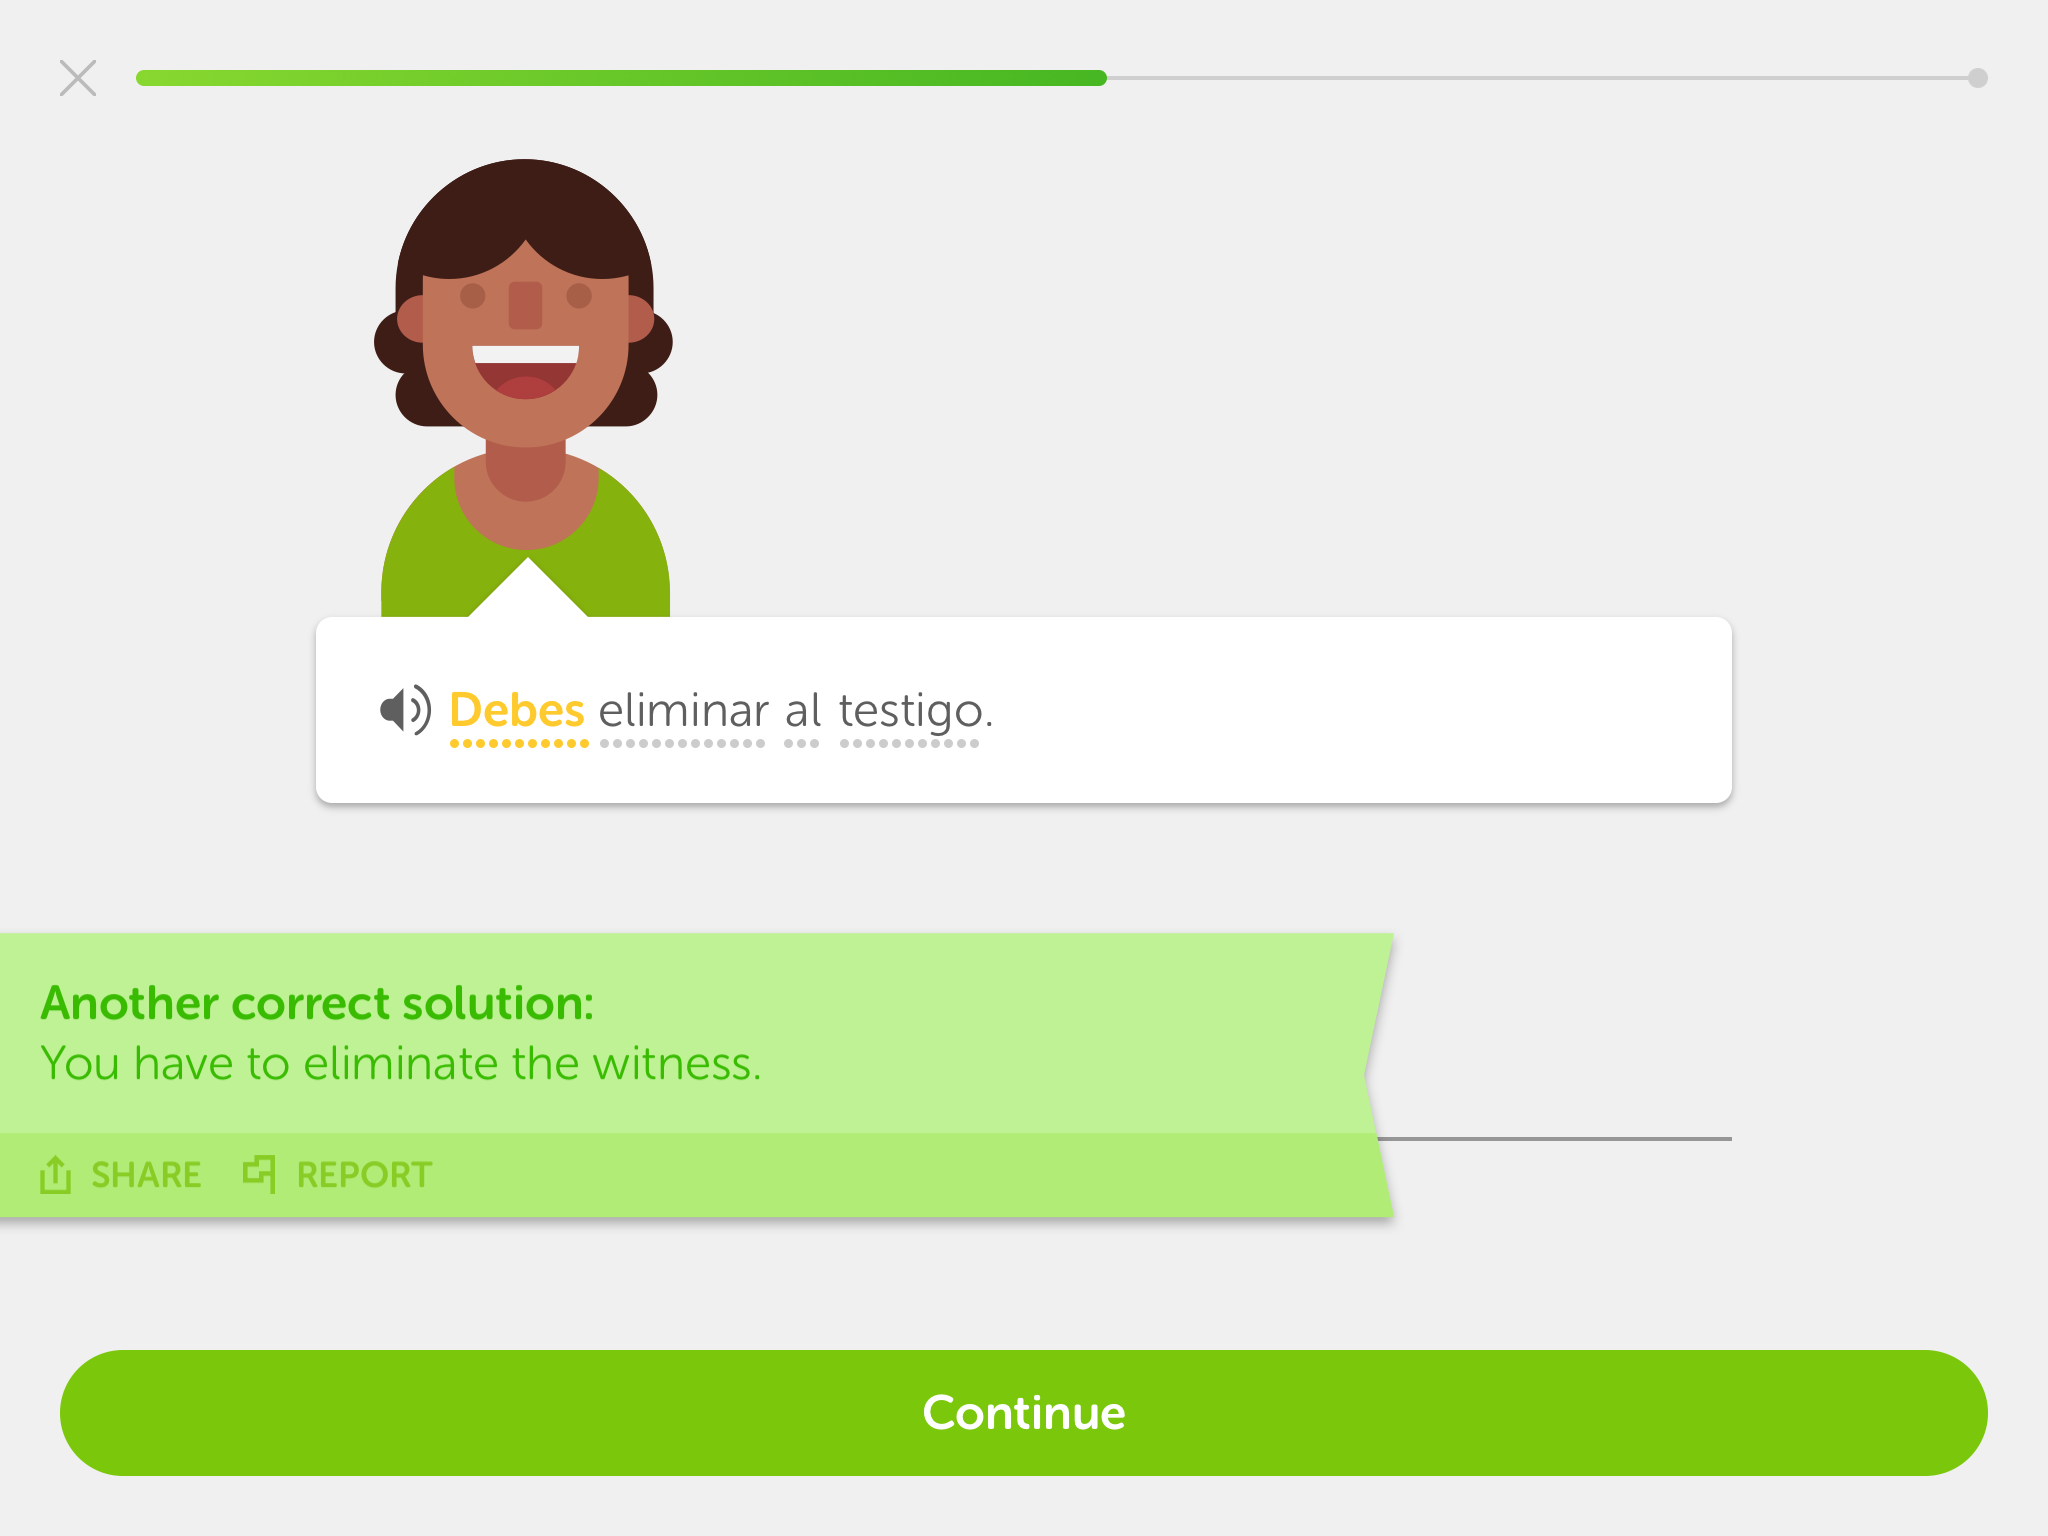 I'm not really sure what Duolingo is trying to teach me...